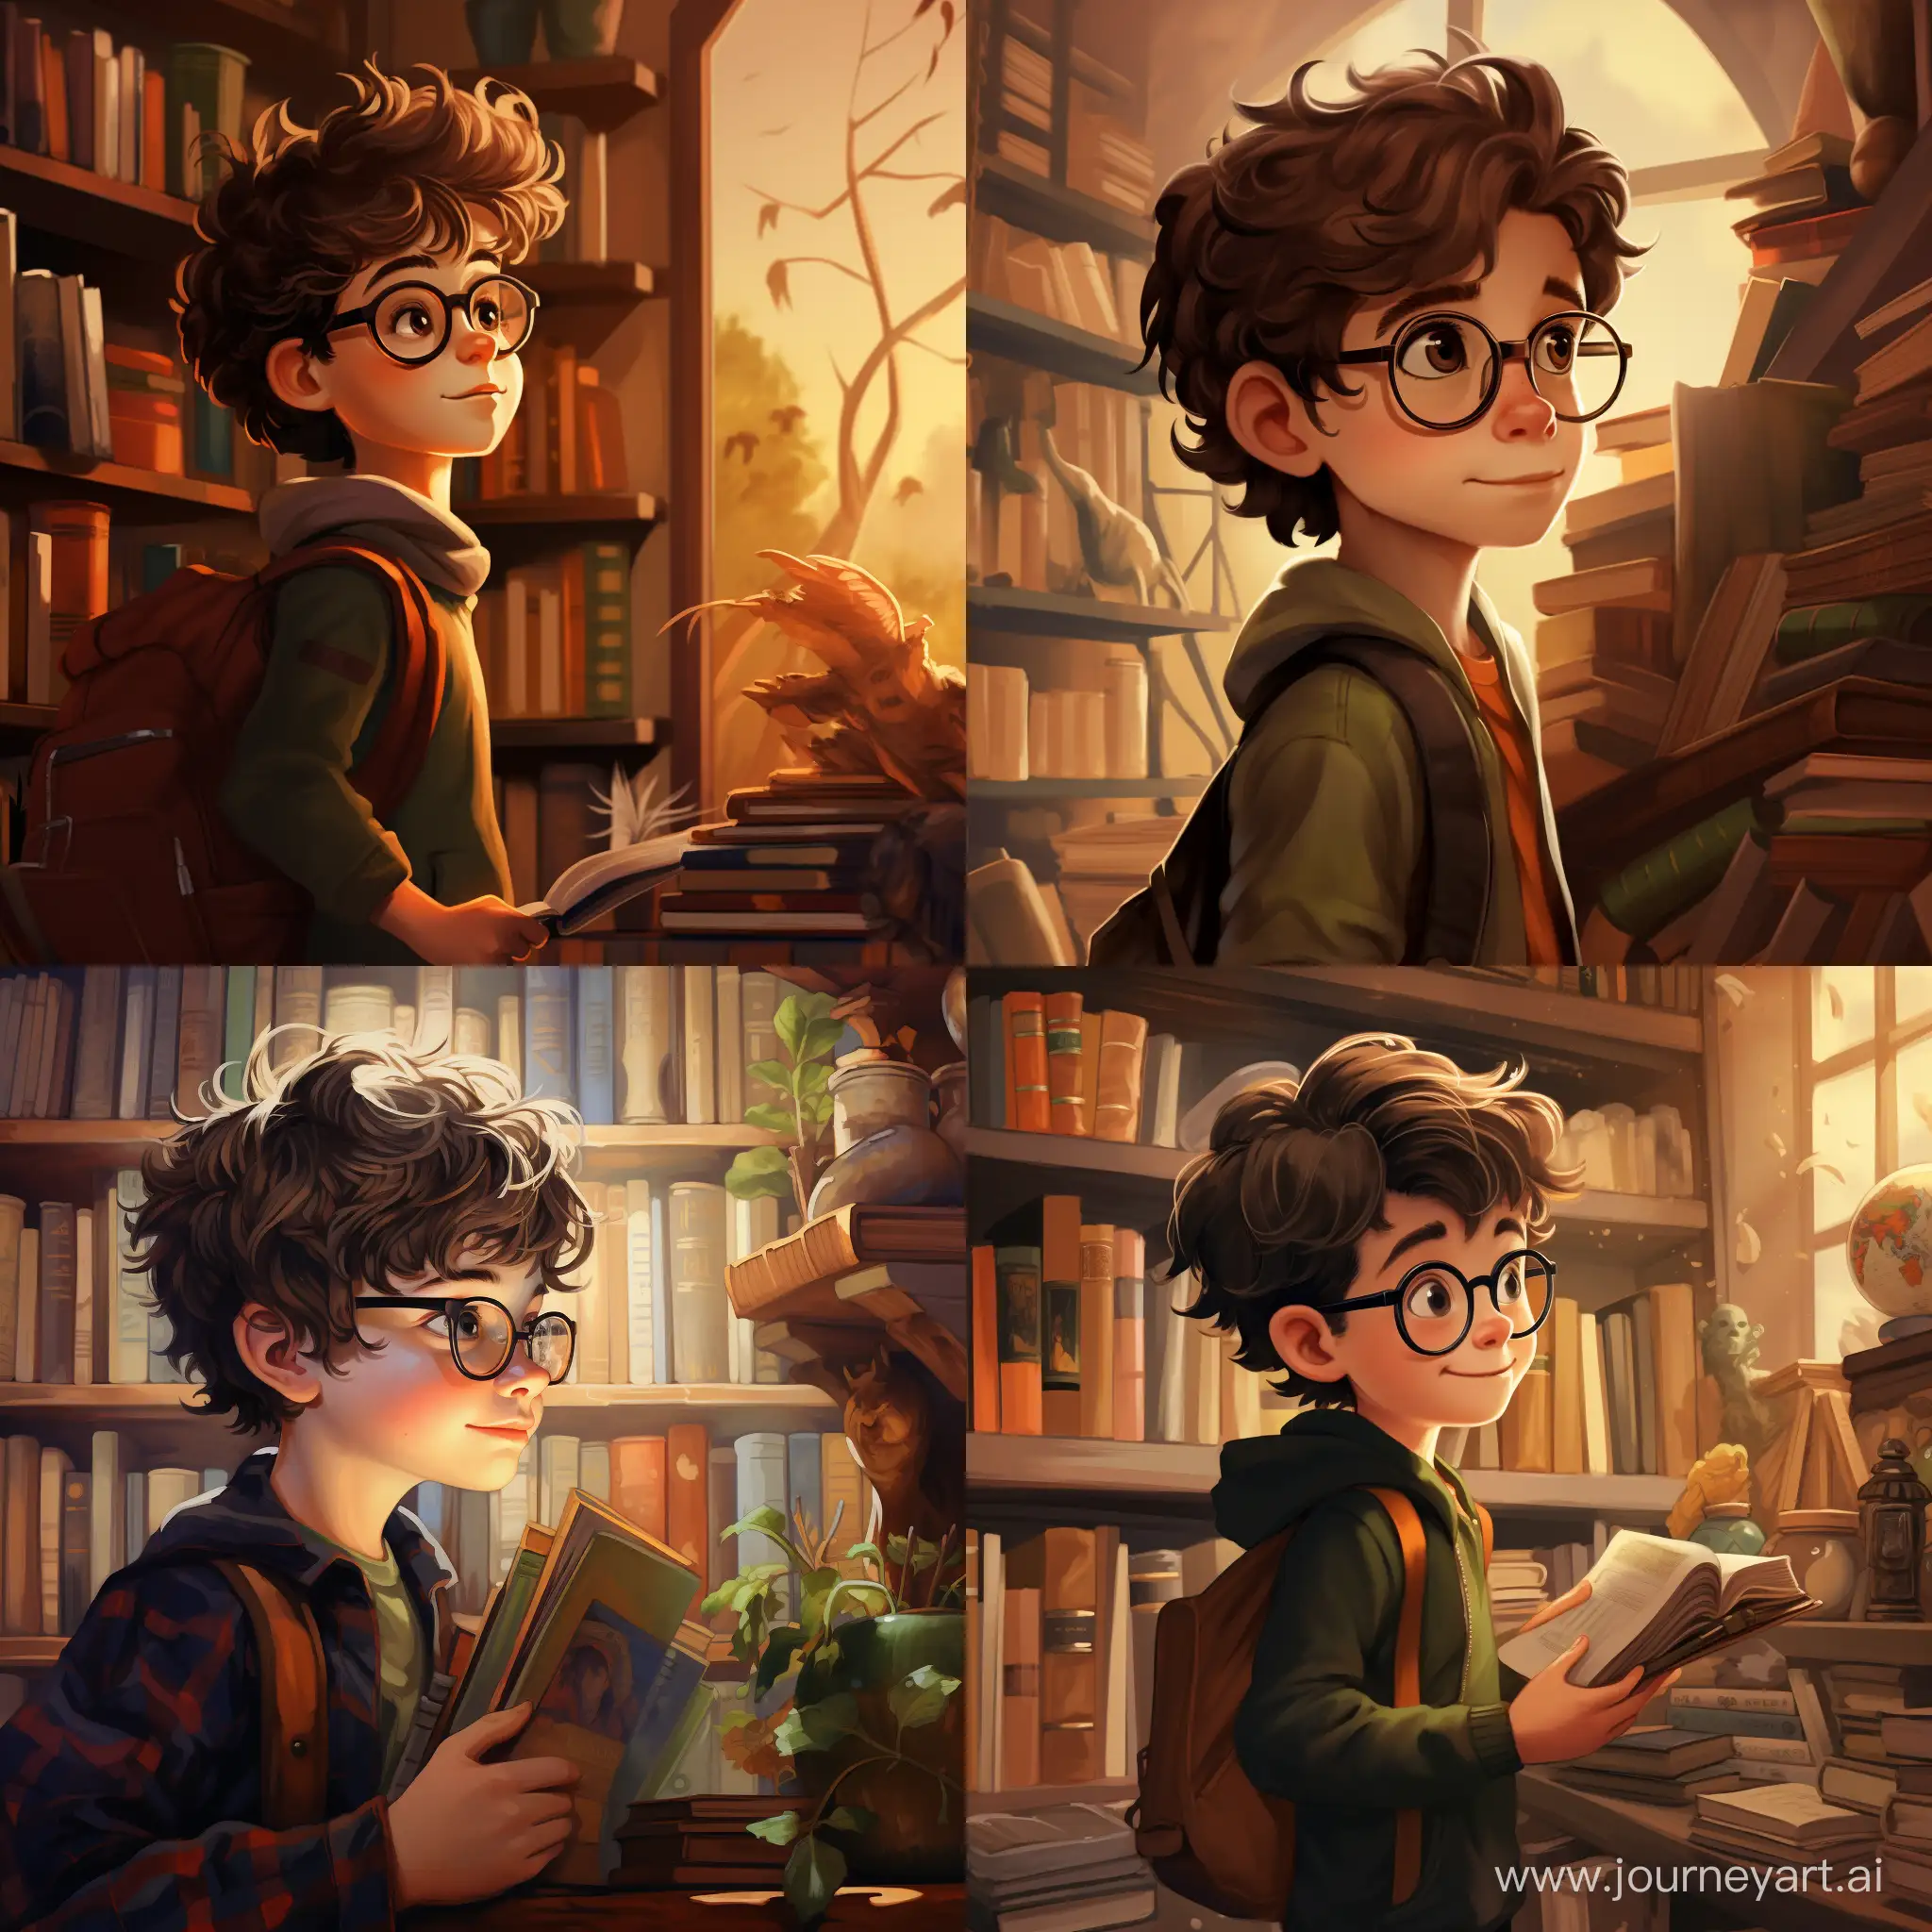 Inquisitive-Boy-with-Brown-Hair-and-Glasses-Exploring-a-Library-Shelf